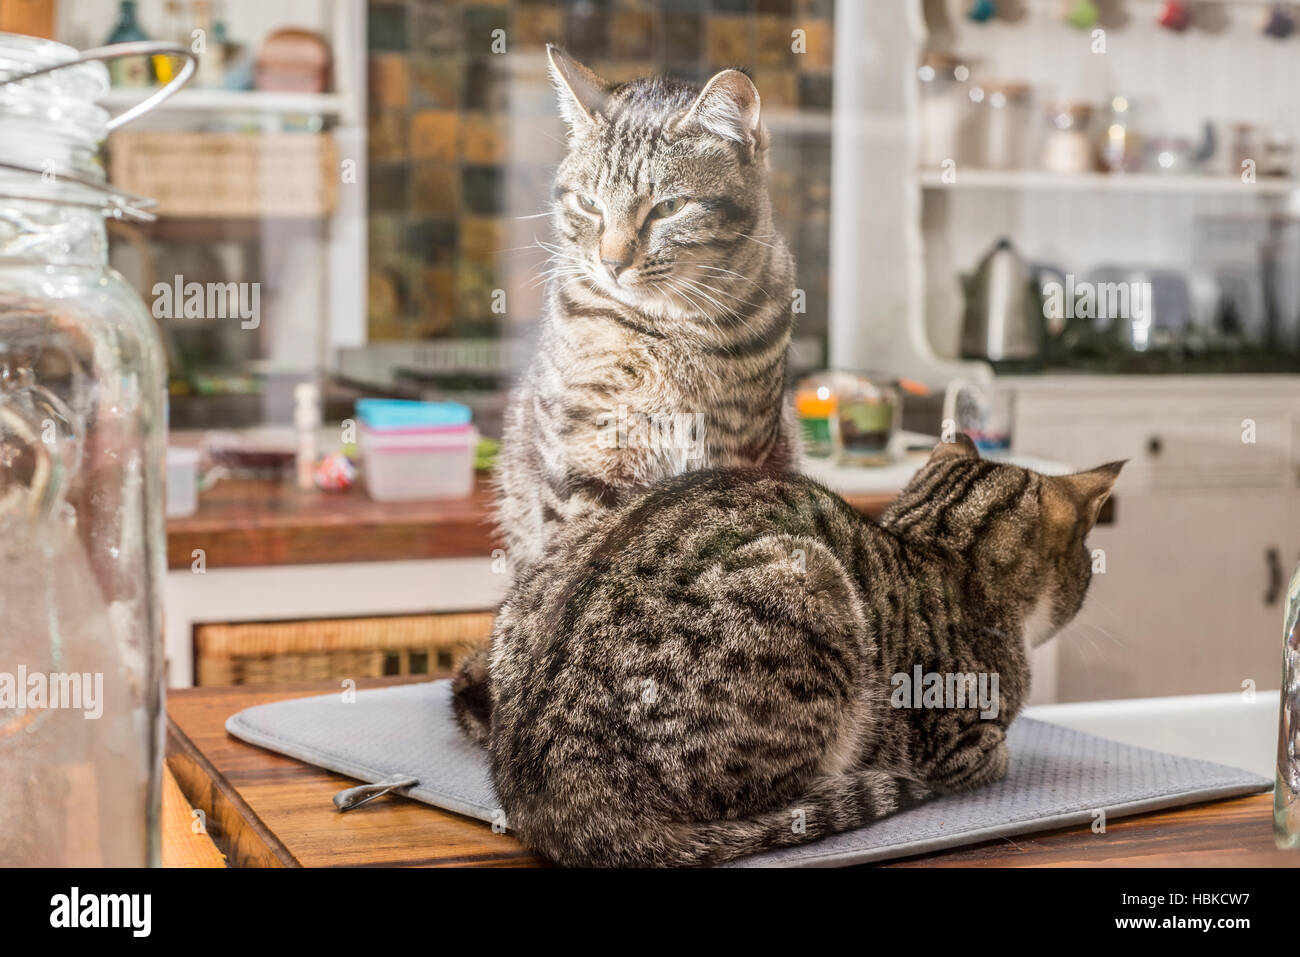 Two Cats by the Kitchen Stock Photo